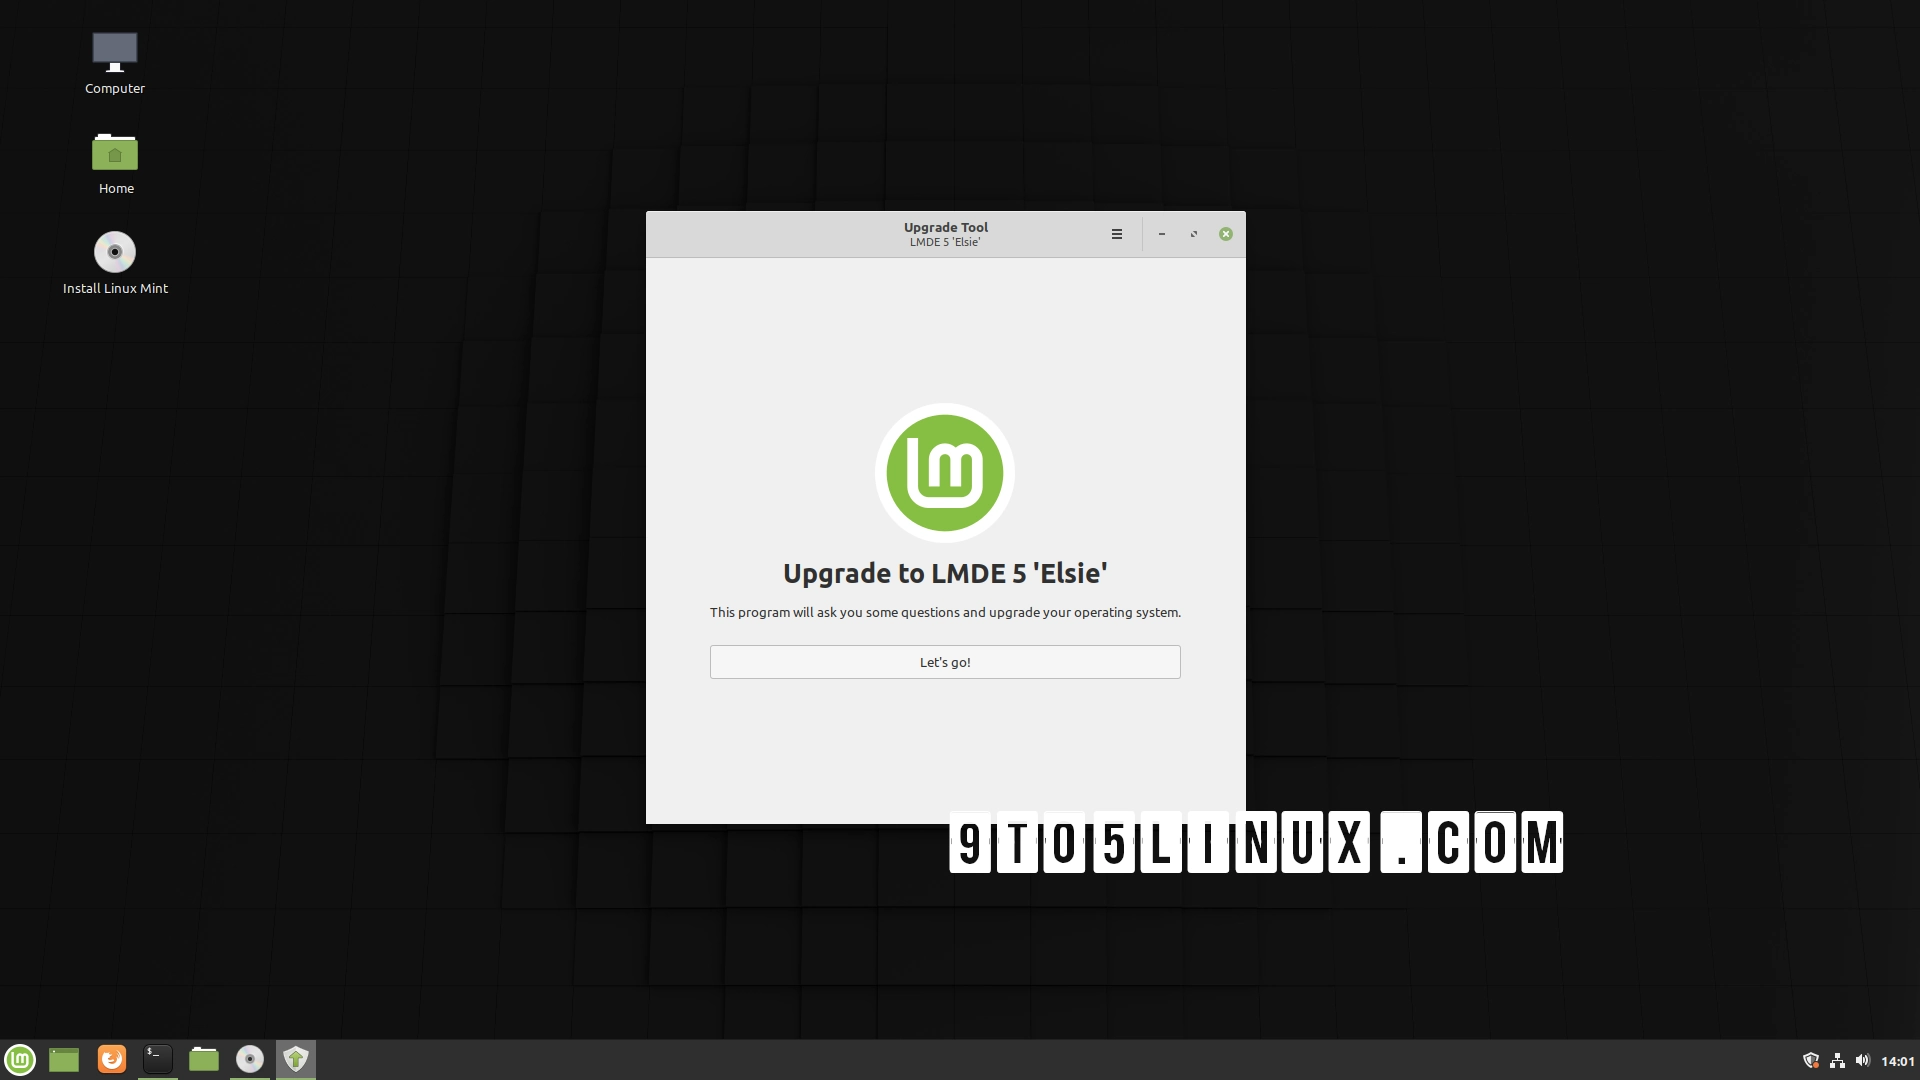 Linux Mint’s New Upgrade Tool Enters Public Beta Testing, Here’s How to Use It